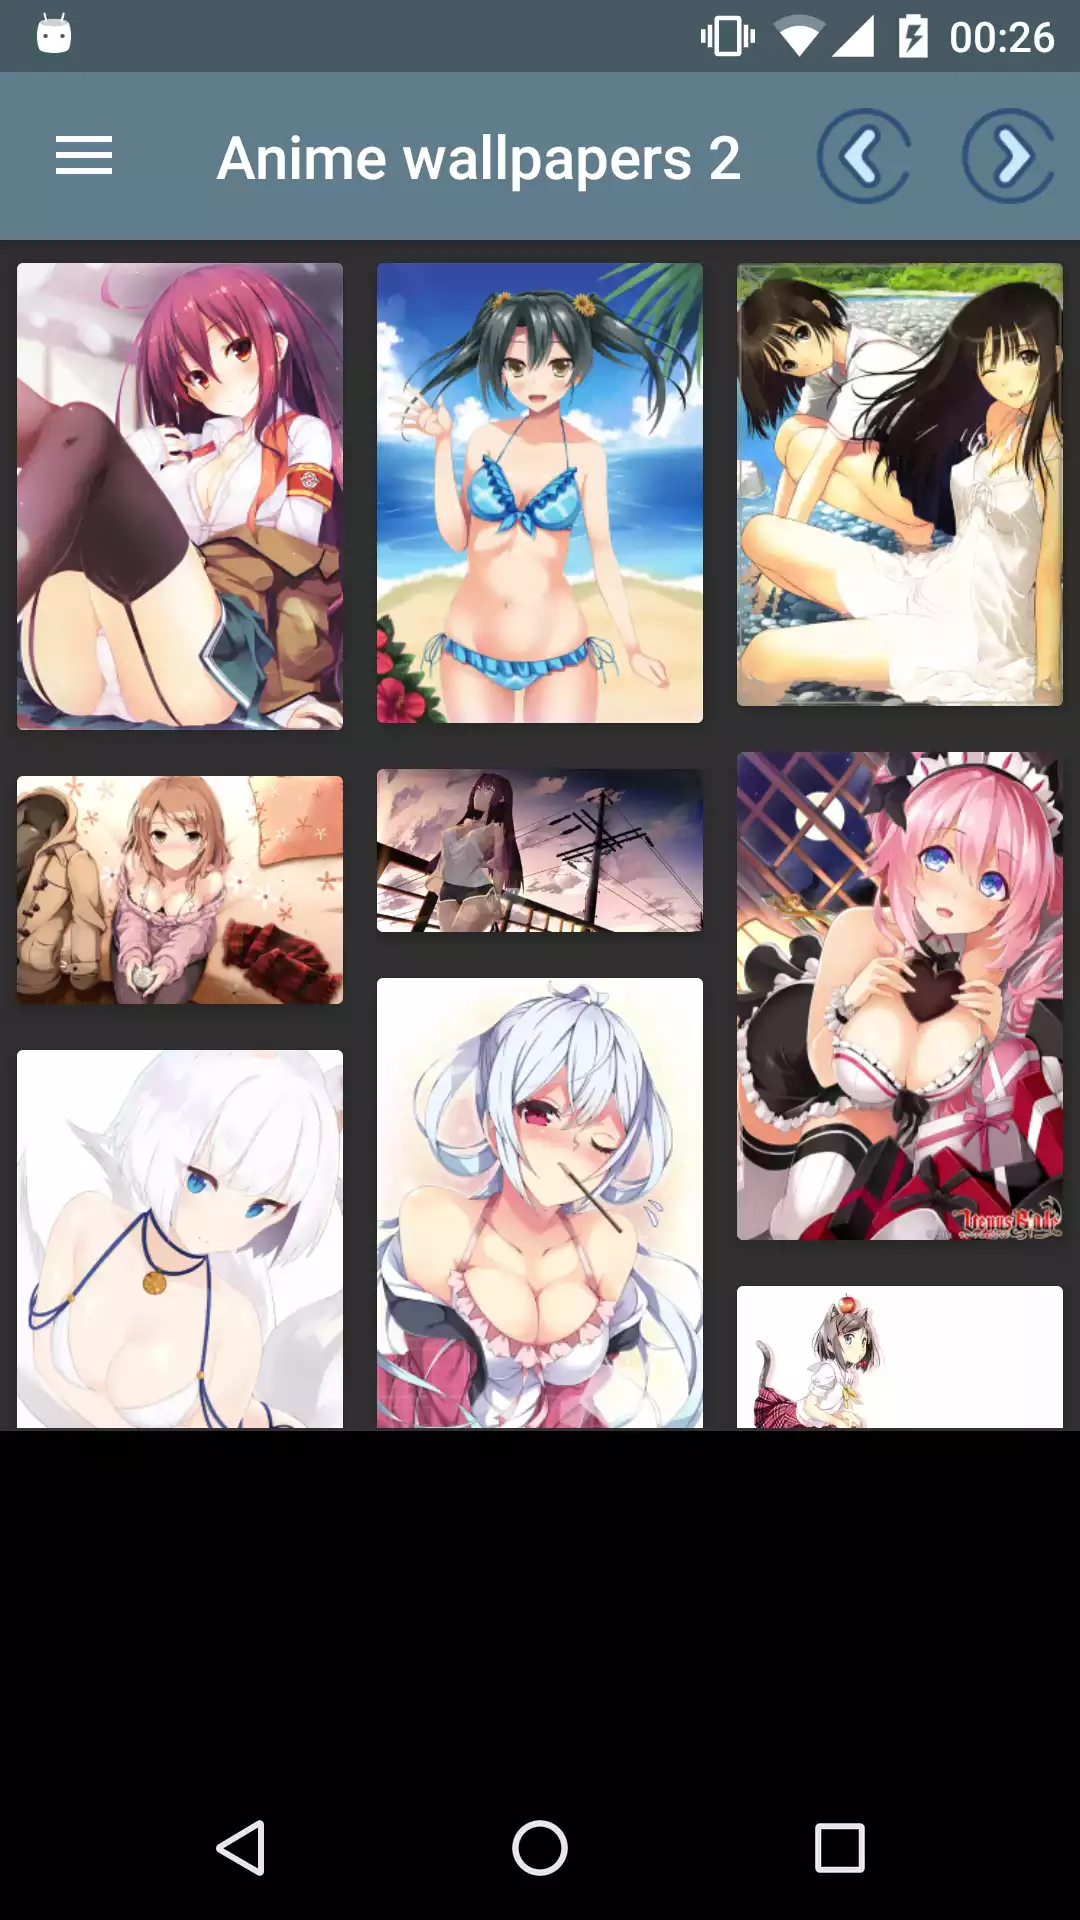 Sexy Anime Wallpapers android,pice,hentei,anime,henta,hot,asian,nyomi,app,wallpapers,galleries,picture,download,manga,pornstar,best,sexy,wallpaper,hentai,banxxx,for,hintai,drawings,pic,japan,pics